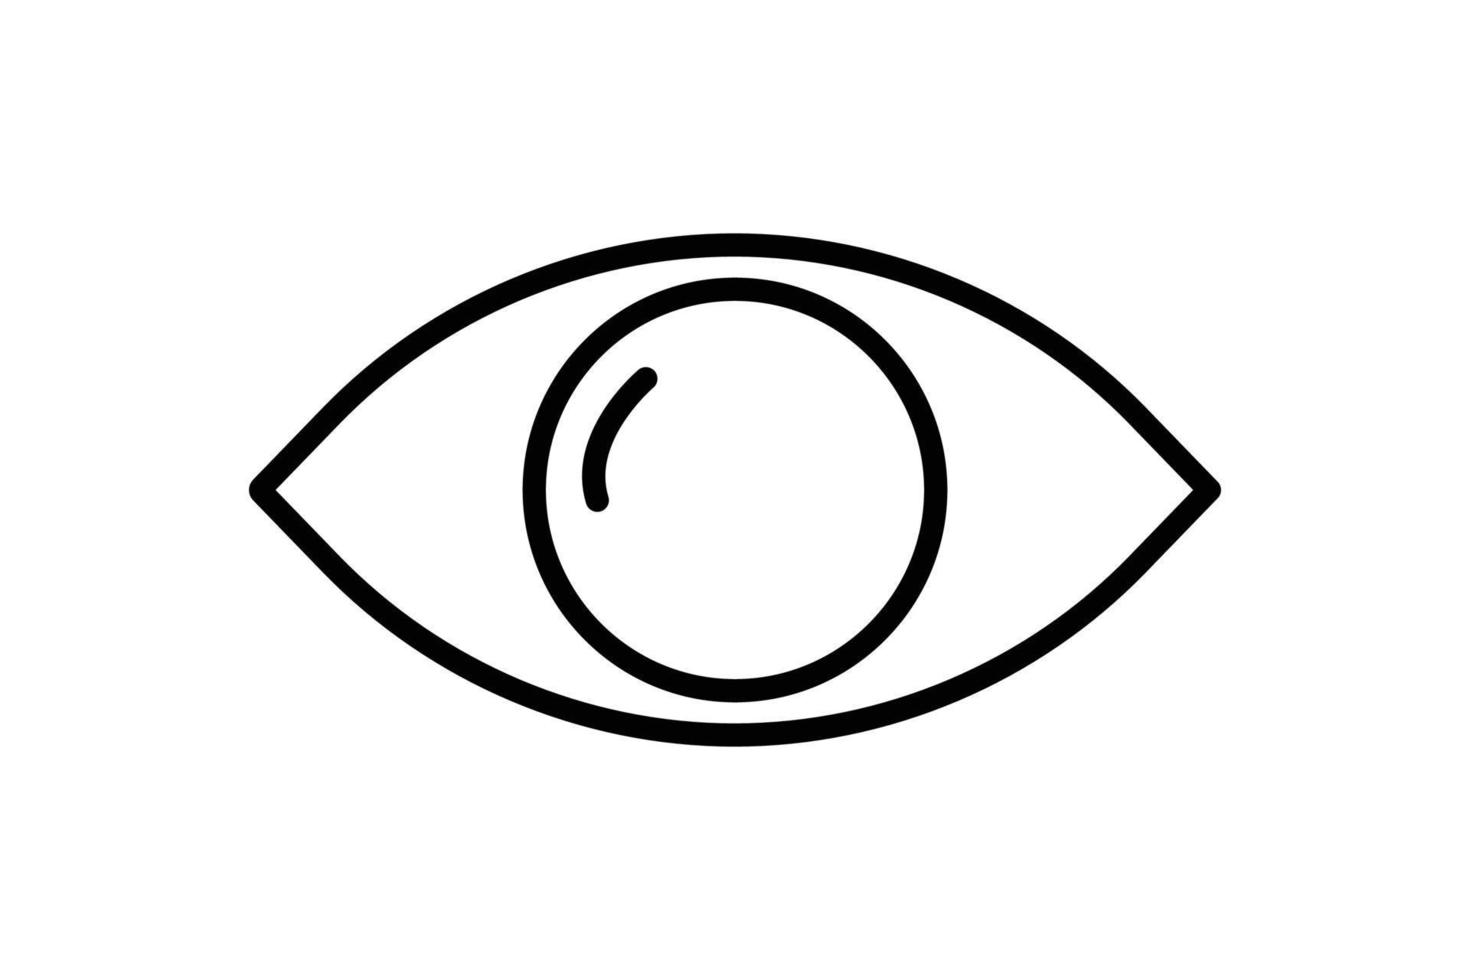 Eye icon illustration. icon related to human organ. Line icon style. Simple vector design editable